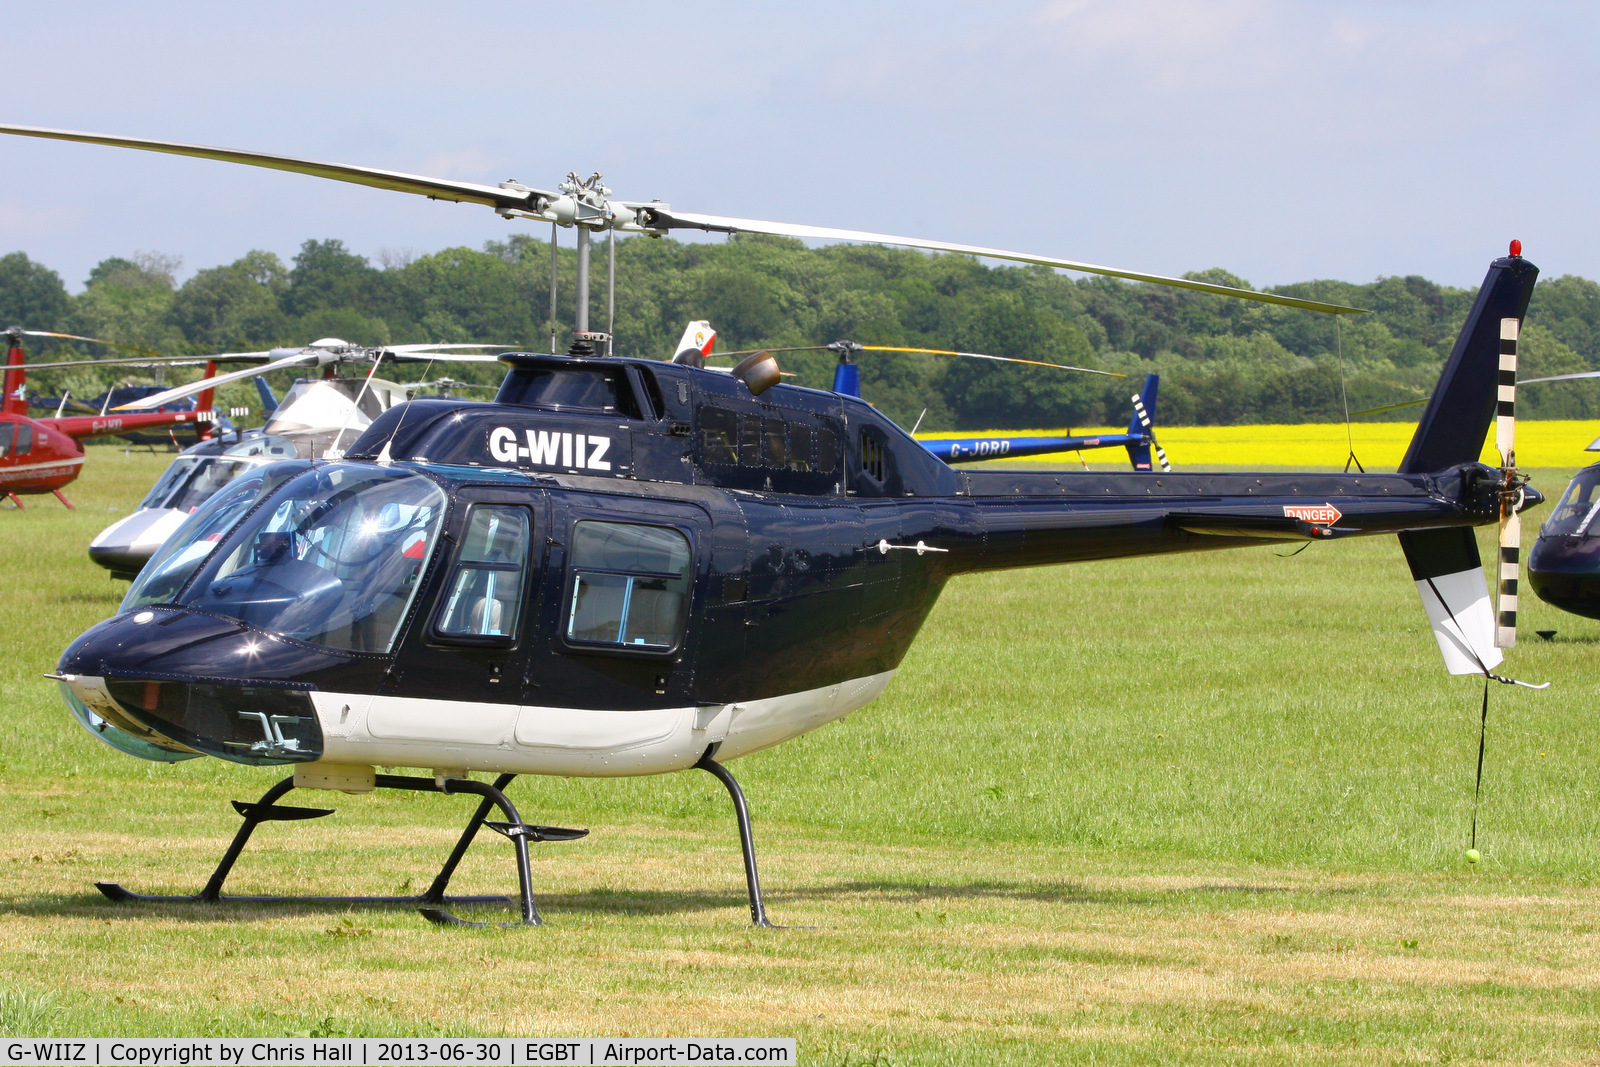 G-WIIZ, 1969 Agusta AB-206B JetRanger II C/N 8111, being used for ferrying race fans to the British F1 Grand Prix at Silverstone